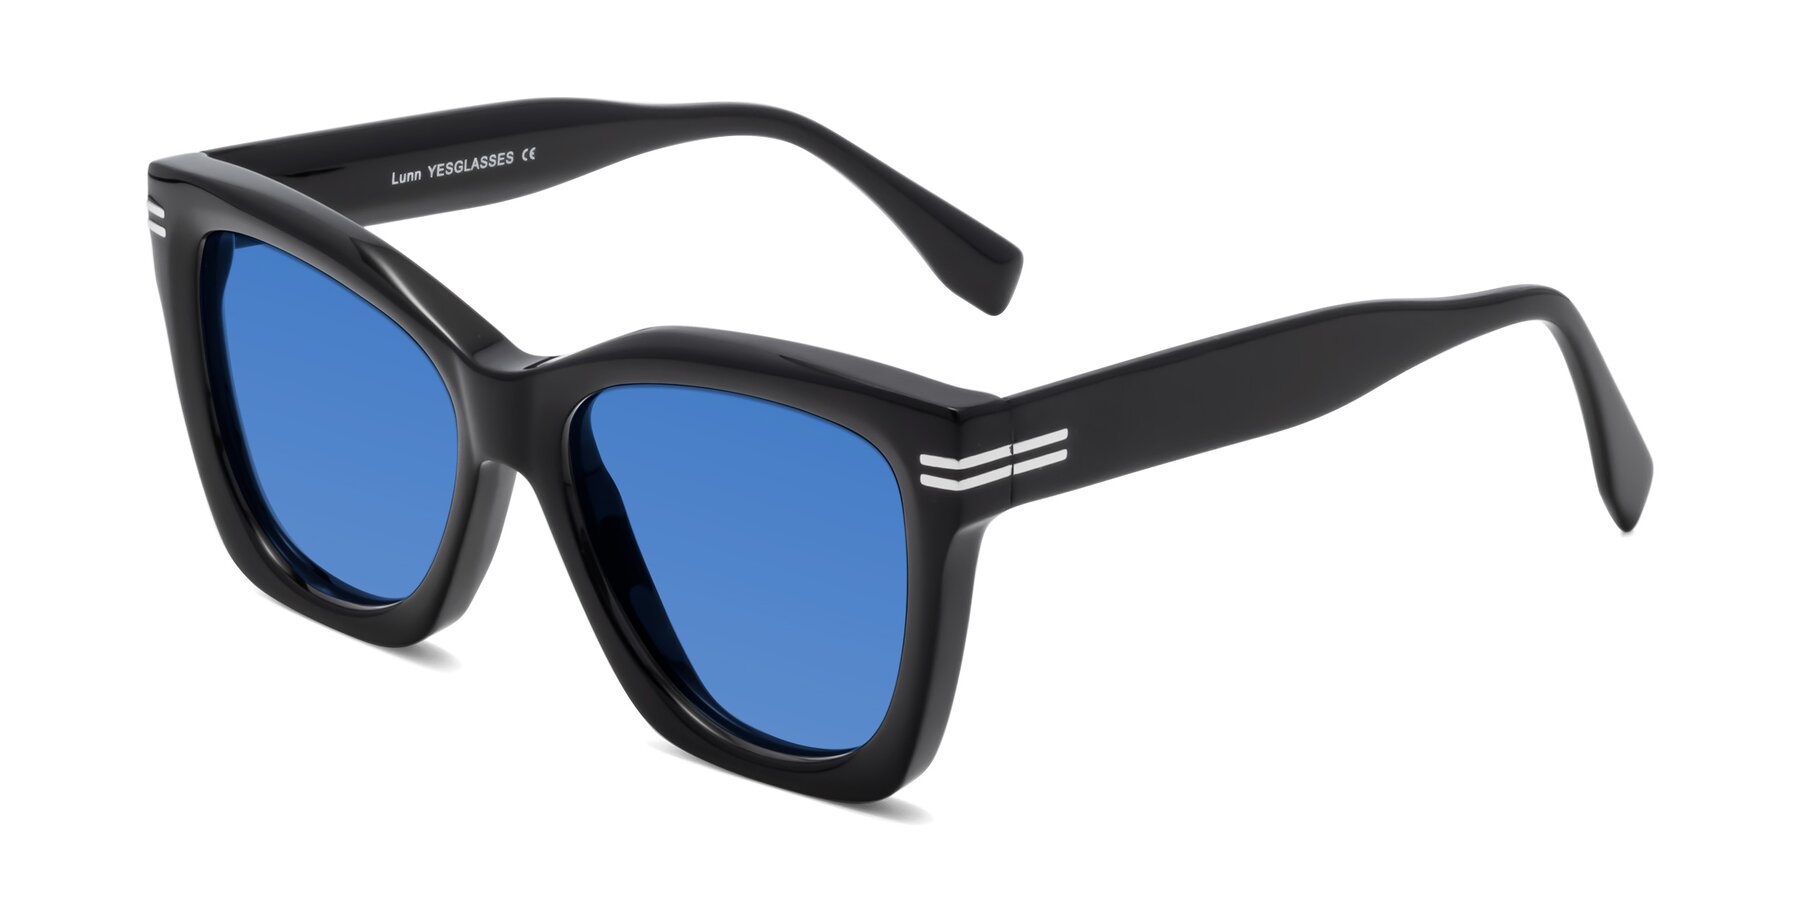 Angle of Lunn in Black with Blue Tinted Lenses